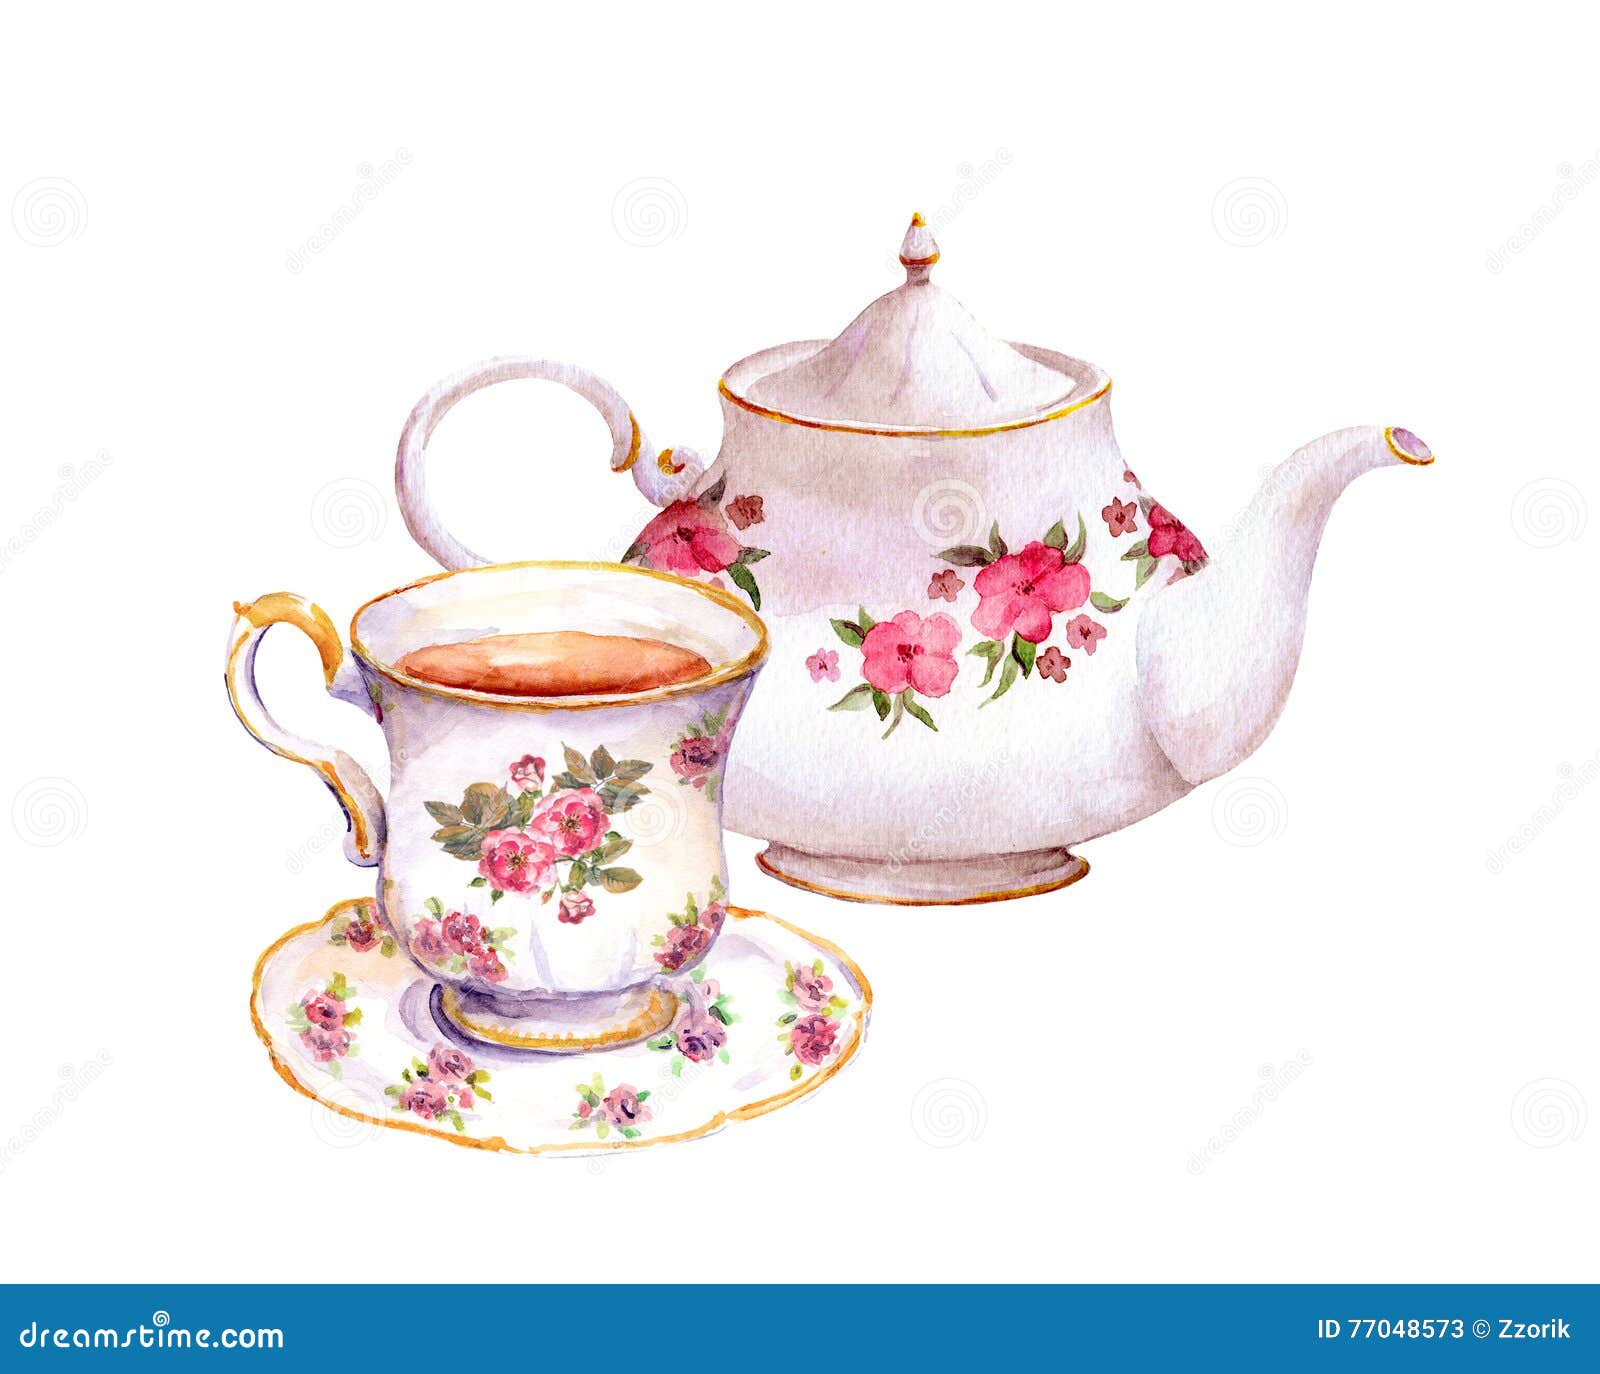 Tea Pot And Cup Pictures / Search for teapot teacup pictures, lovepik ...